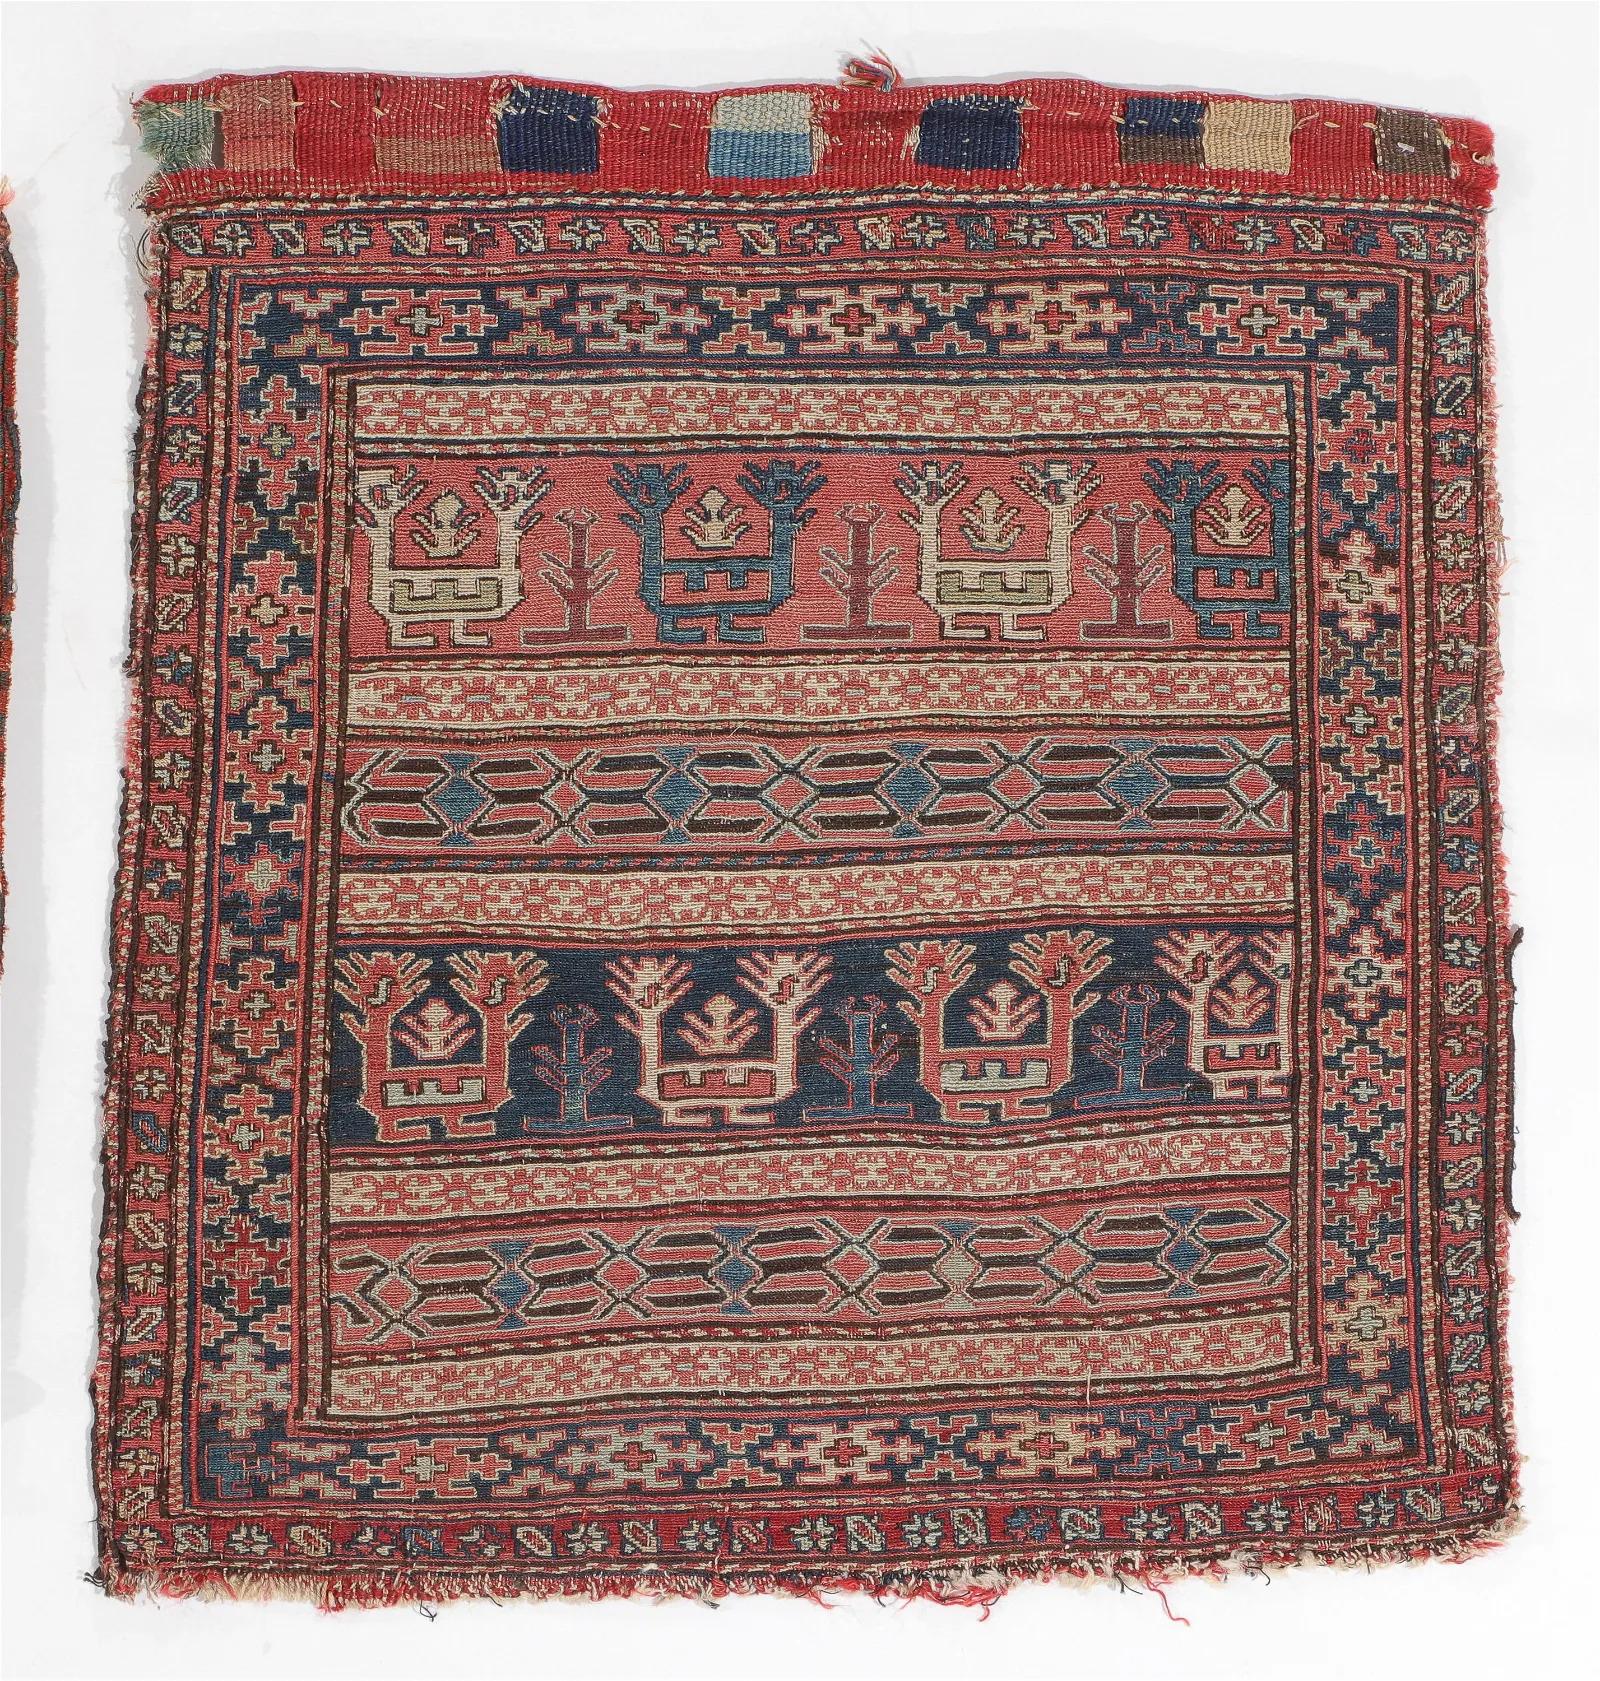 Two Antique Persian Collectible Shahsavan Sumak Rugs 1.10' x 2', 1870s - 2B28 In Good Condition For Sale In Bordeaux, FR